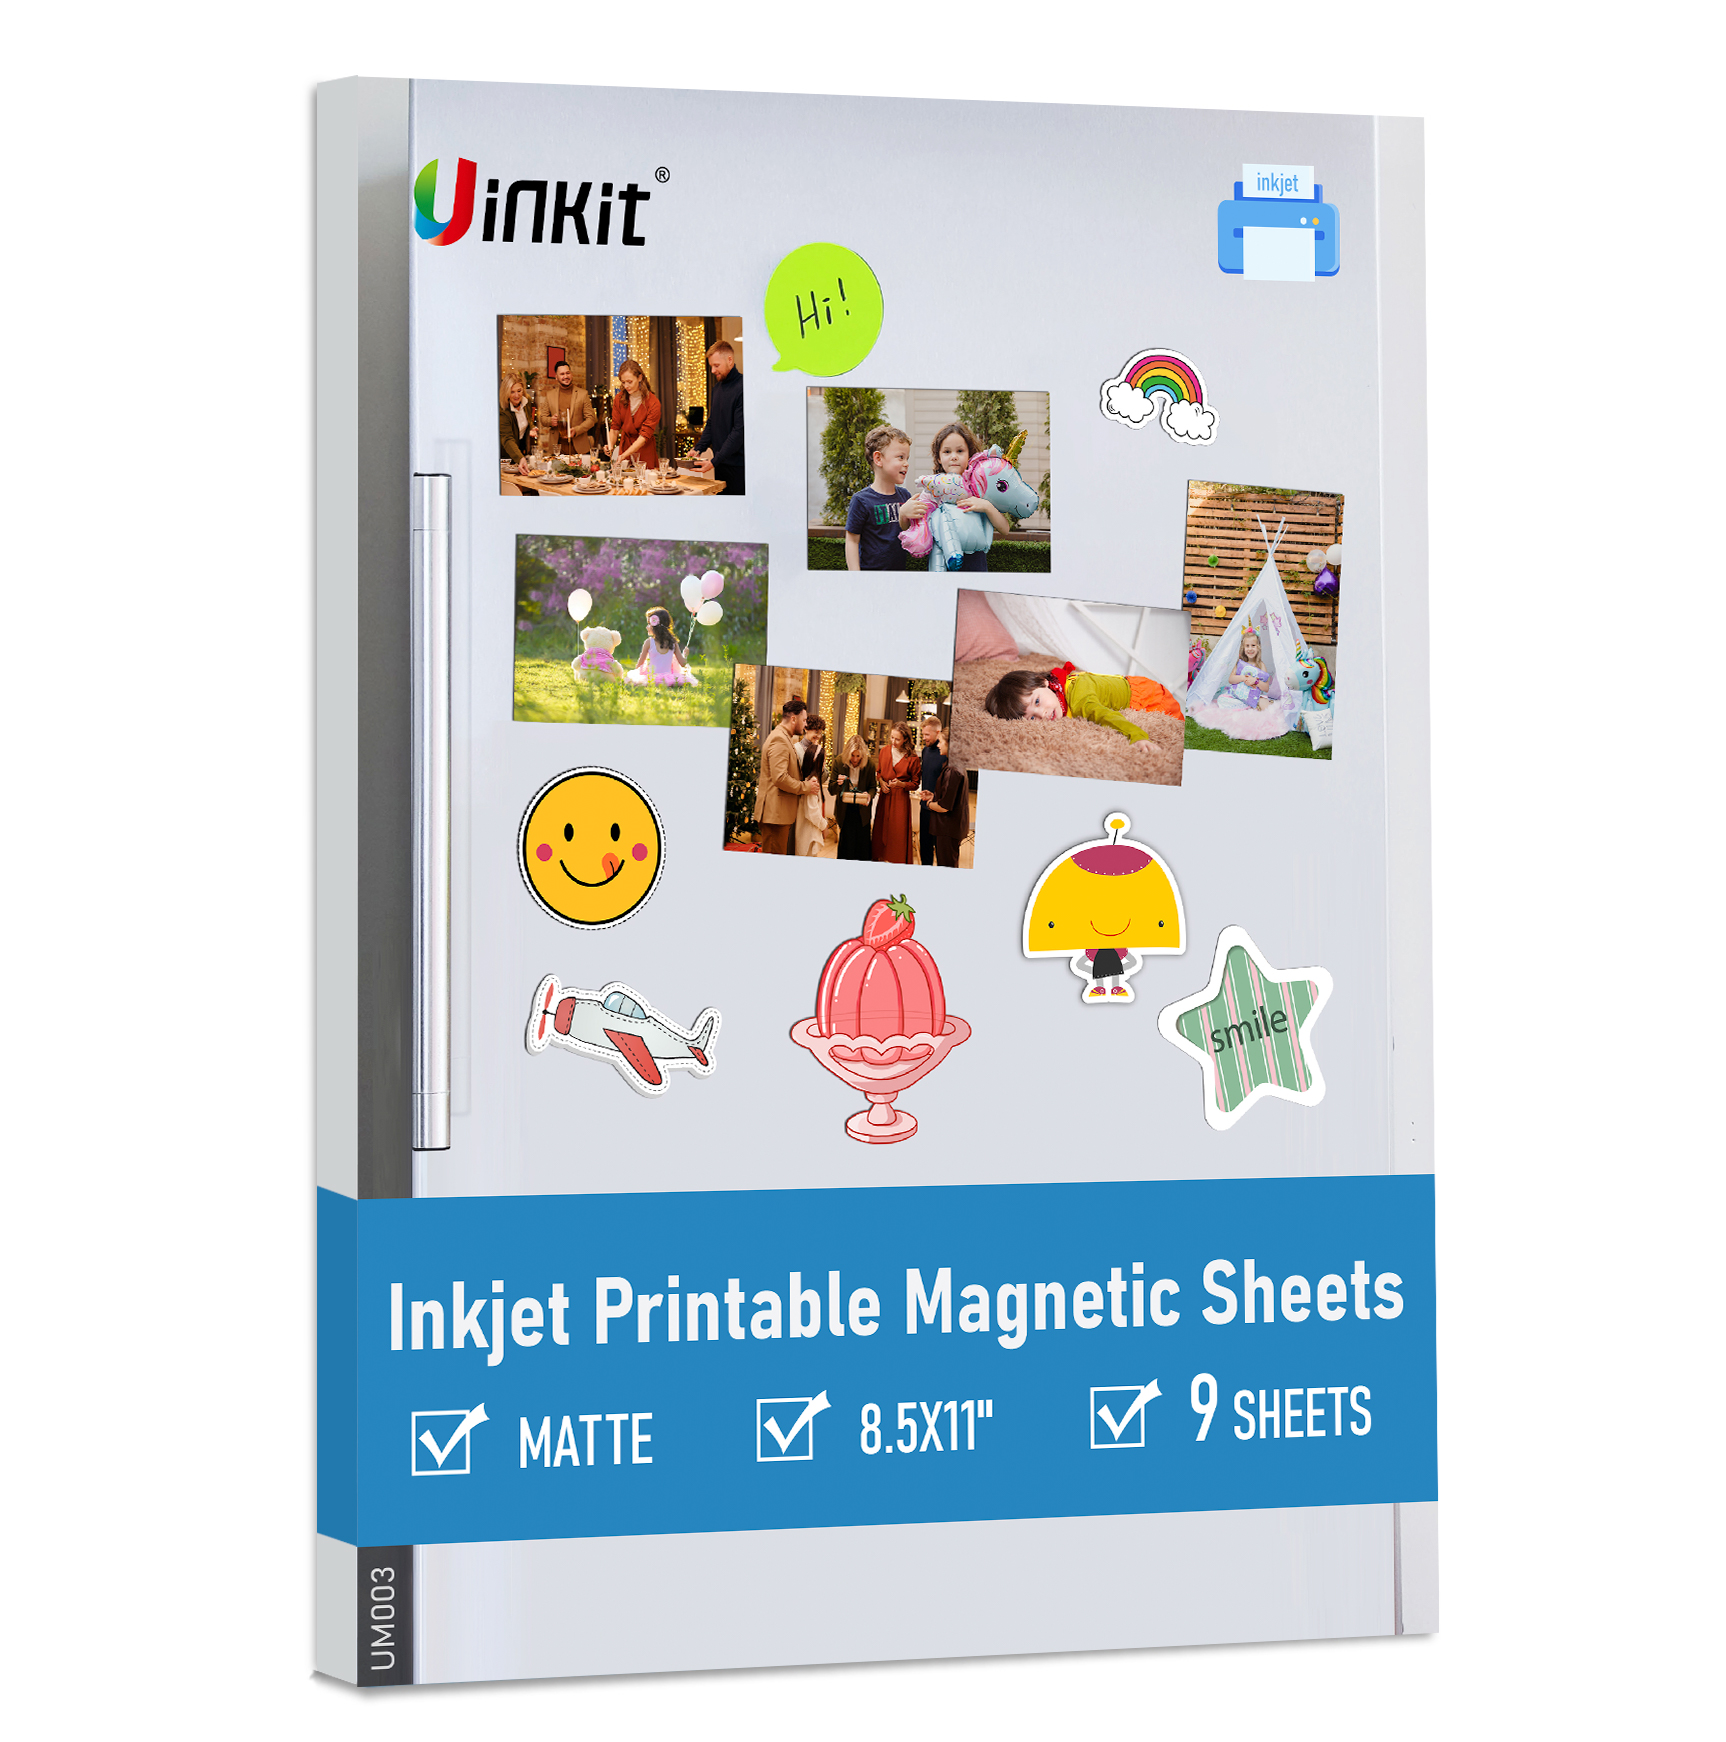 12 Printable Magnetic Sheets, Magnet Photo Paper 8.5x 11 Matte for